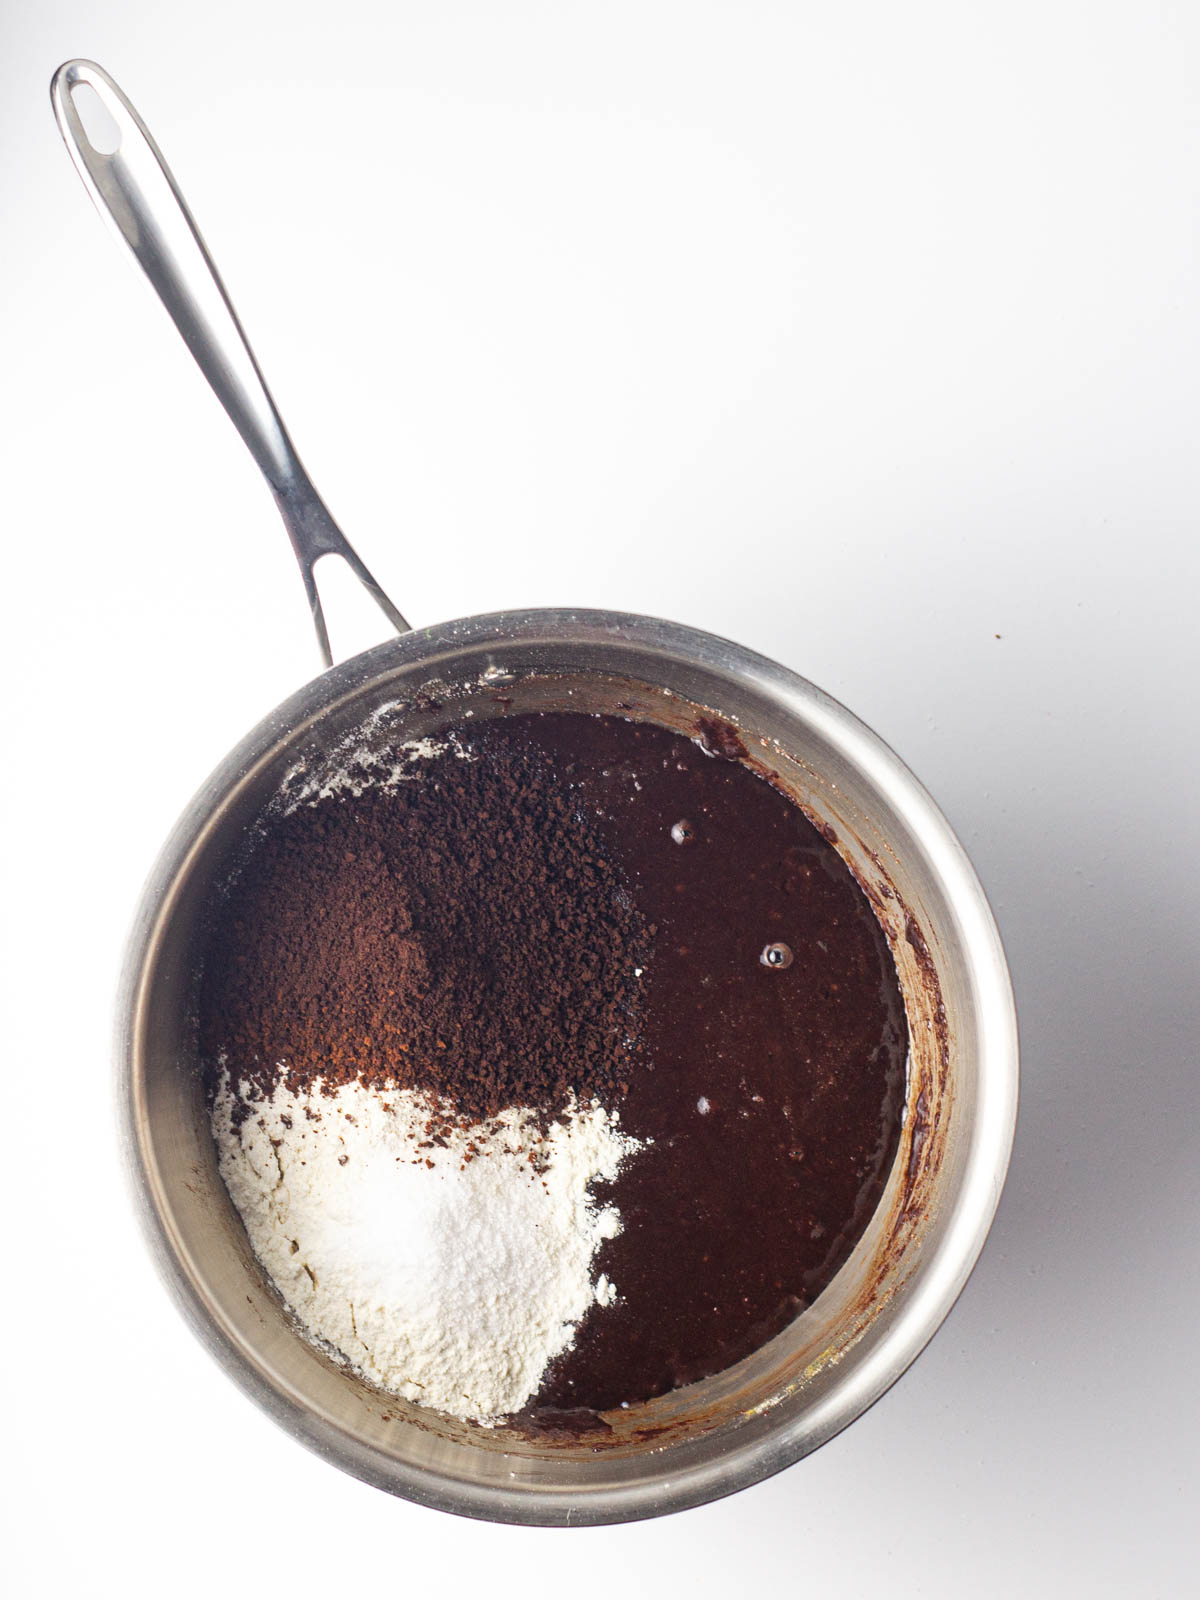 Flour, espresso powder, and salt added to the peppermint mocha brownie batter in a saucepan.